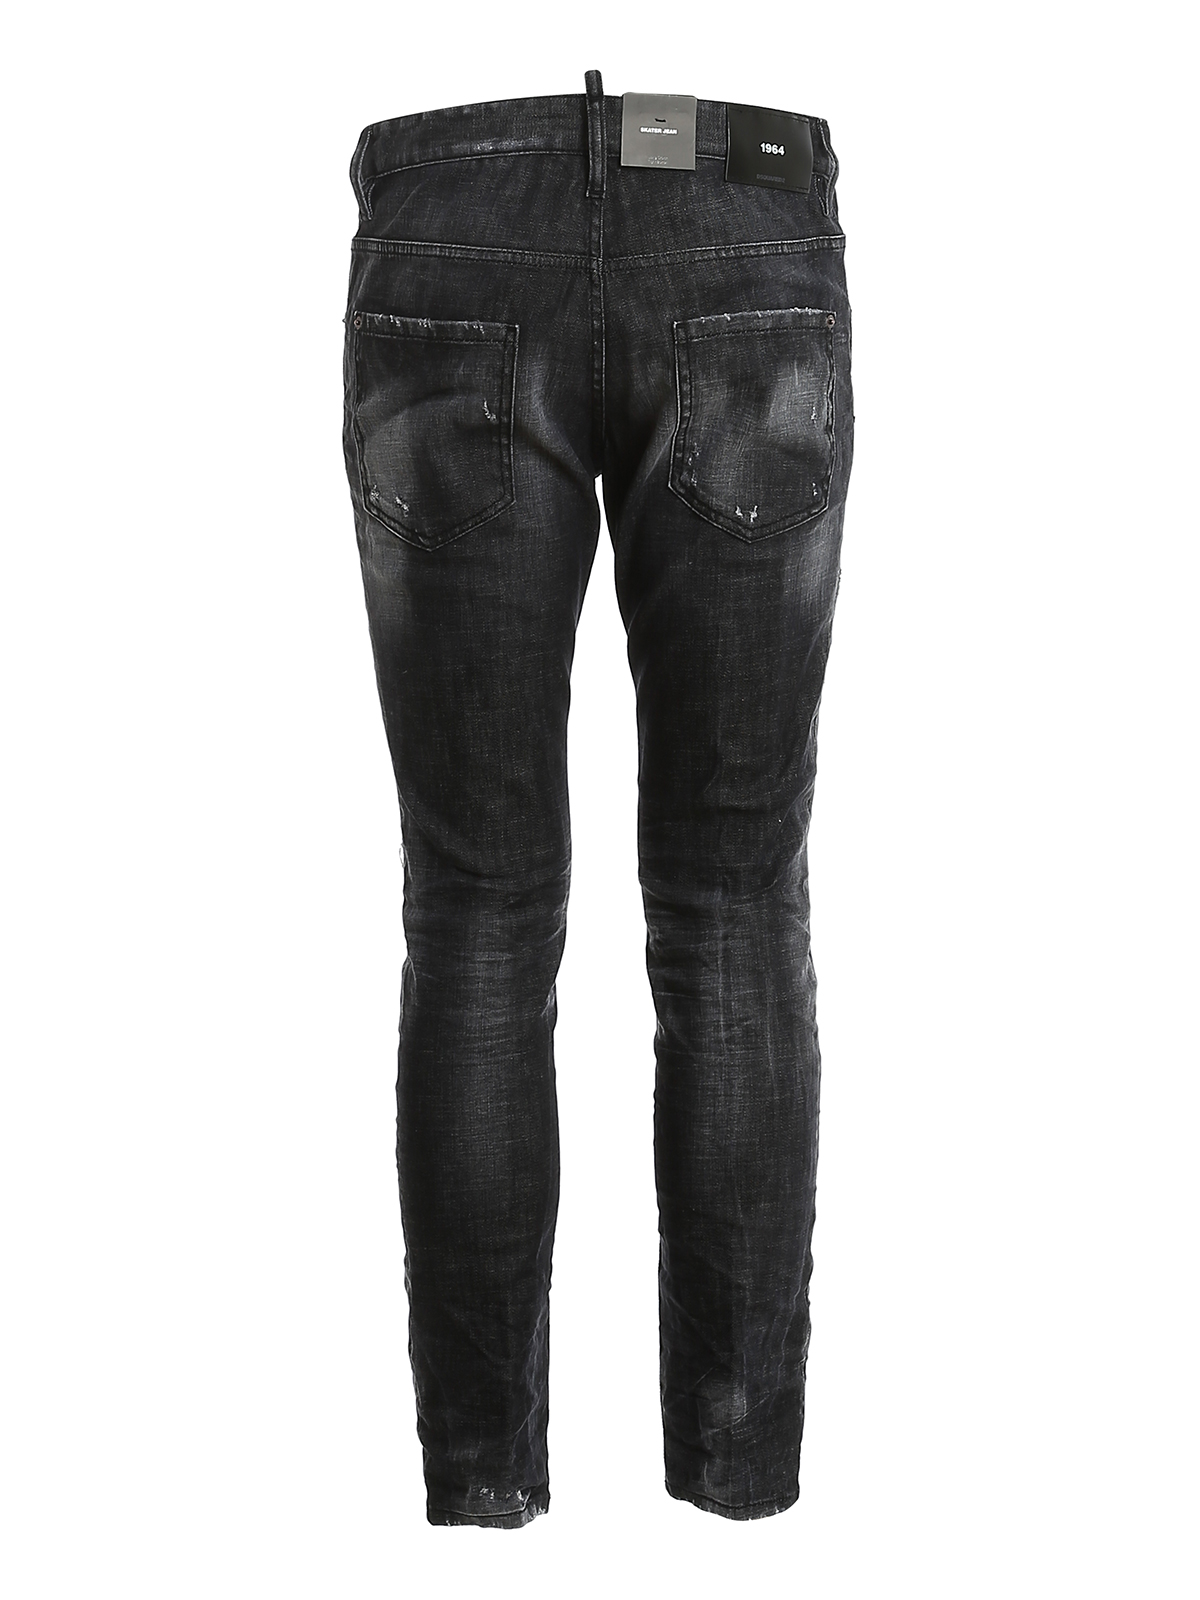 Straight leg jeans Dsquared2 - Skater ripped jeans - S74LB0783S30357900